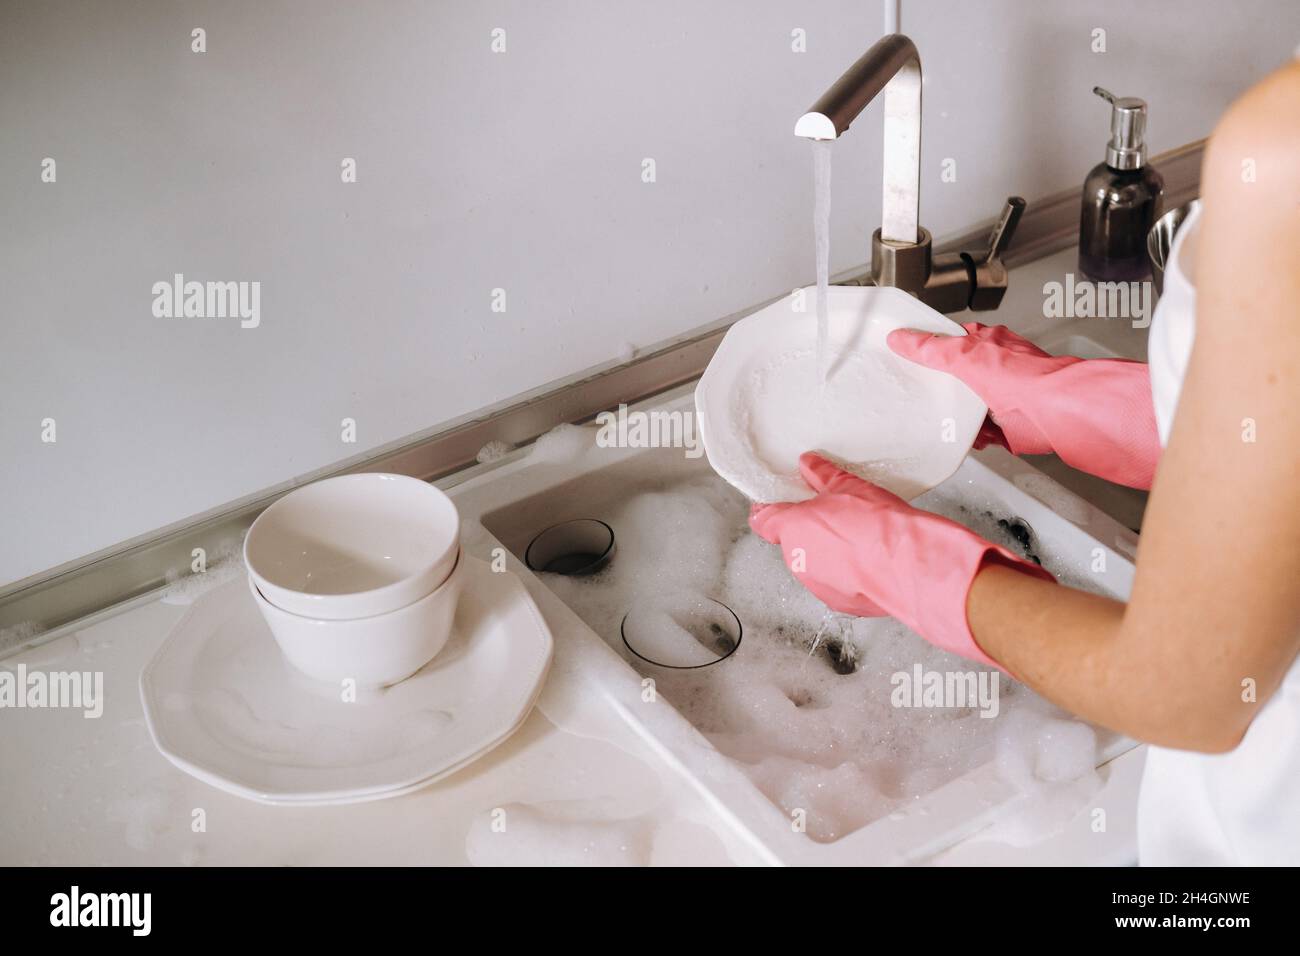 housewife girl in pink gloves washes dishes by hand in the sink with detergent. The girl cleans the house and washes dishes in gloves at home Stock Photo